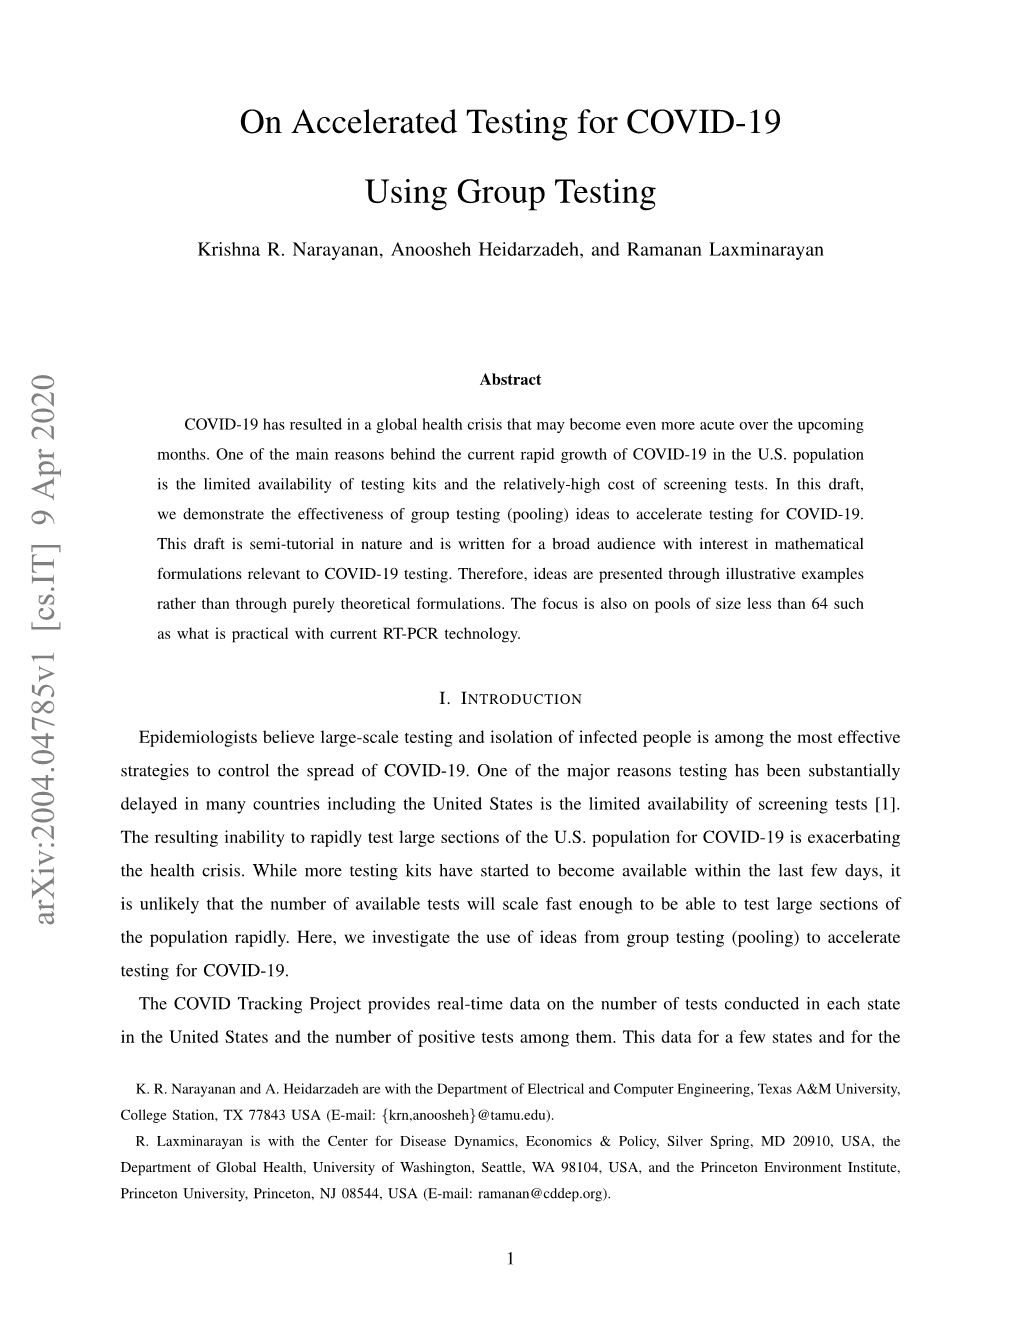 On Accelerated Testing for COVID-19 Using Group Testing